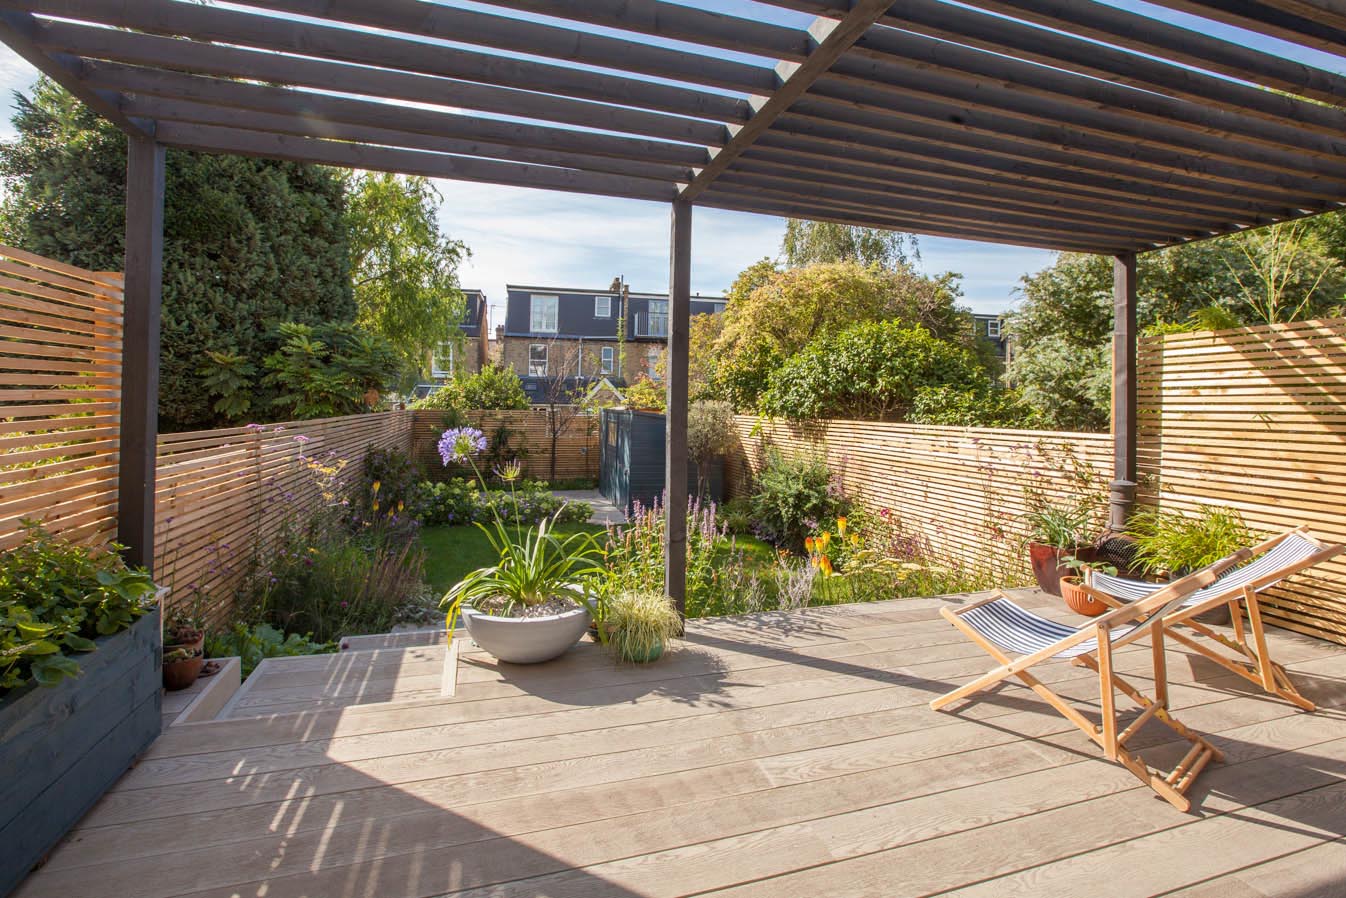 </p> <p>Find your ideal home design pro on designfor-me.com - get matched and see who's interested in your home project. Click image to see more inspiration from our design pros</p> <p>Design by Simon, garden designer from East Hampshire, South East</p> <p> #gardendesign #gardeninspiration #gardenlove #gardenideas #gardens </p> <p>